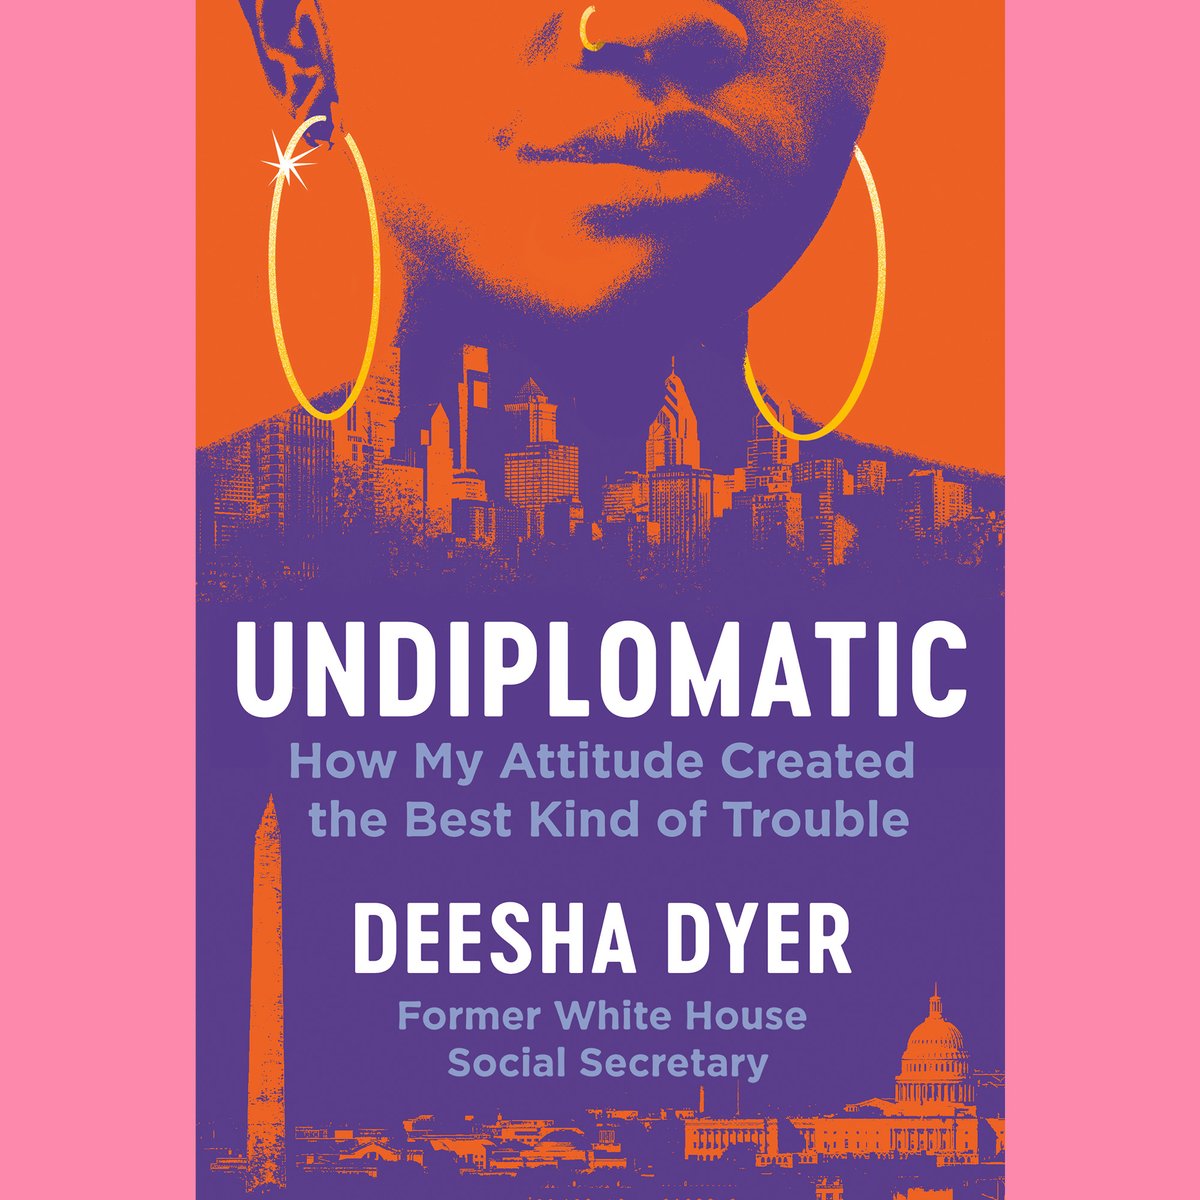 Former White House Social Secretary and advocate @DeeshaDyer joins @danielfford on the show tomorrow to chat about her book Undiplomatic: How My Attitude Created the Best Kind of Trouble. Subscribe and tune in: apple.co/4bmzB8s #writers #podcast #writingcommunity #WBPN